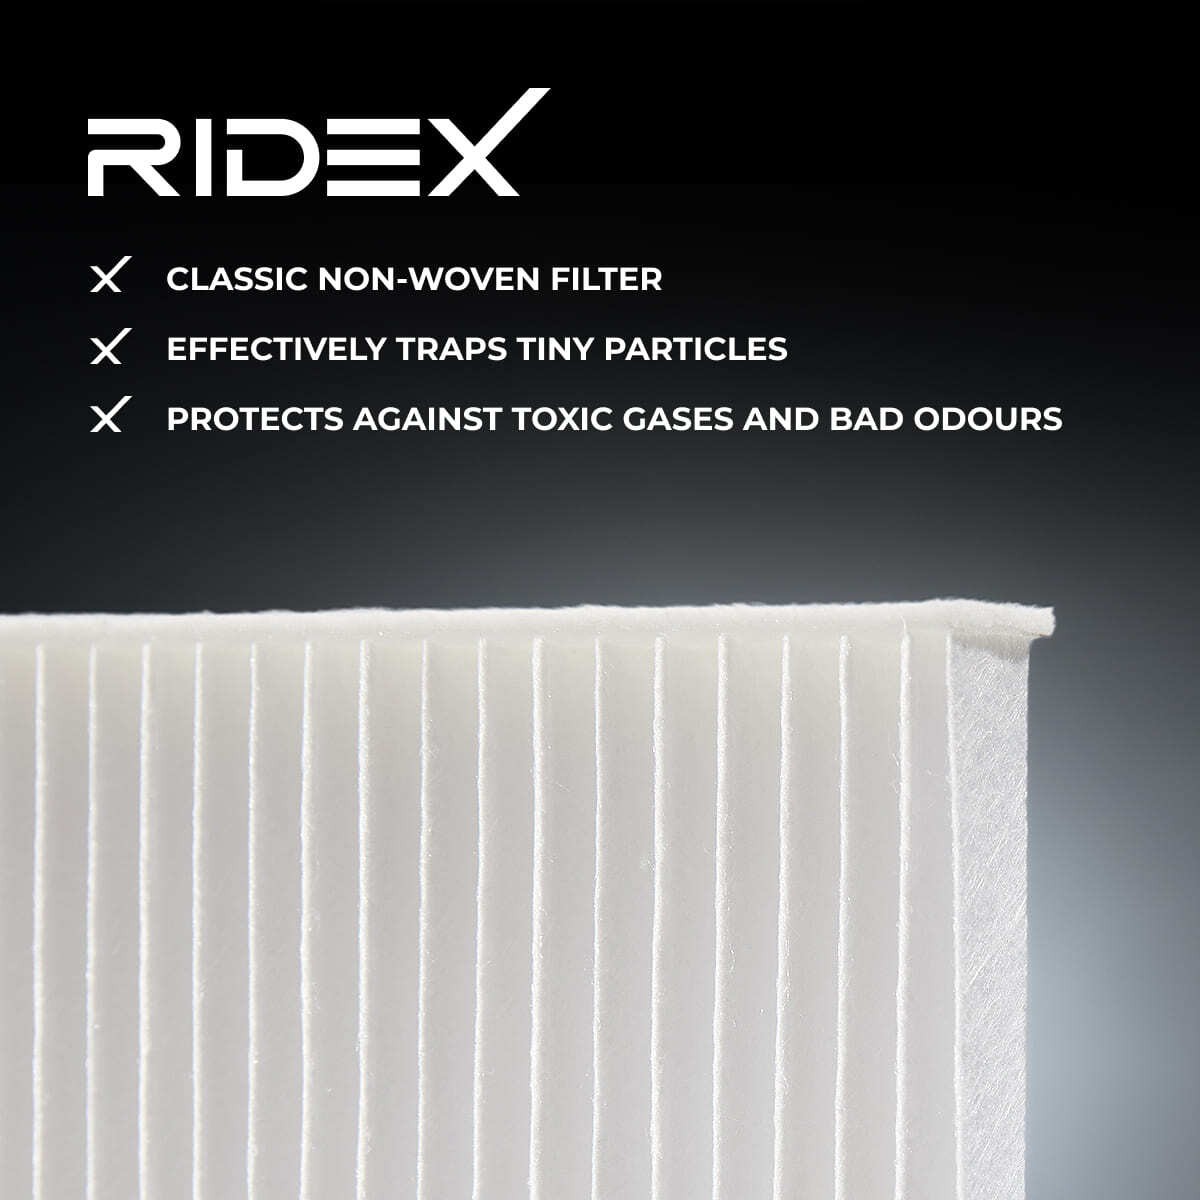 424I0324 Air con filter 424I0324 RIDEX Particulate Filter, 200 mm x 215 mm x 30,5 mm